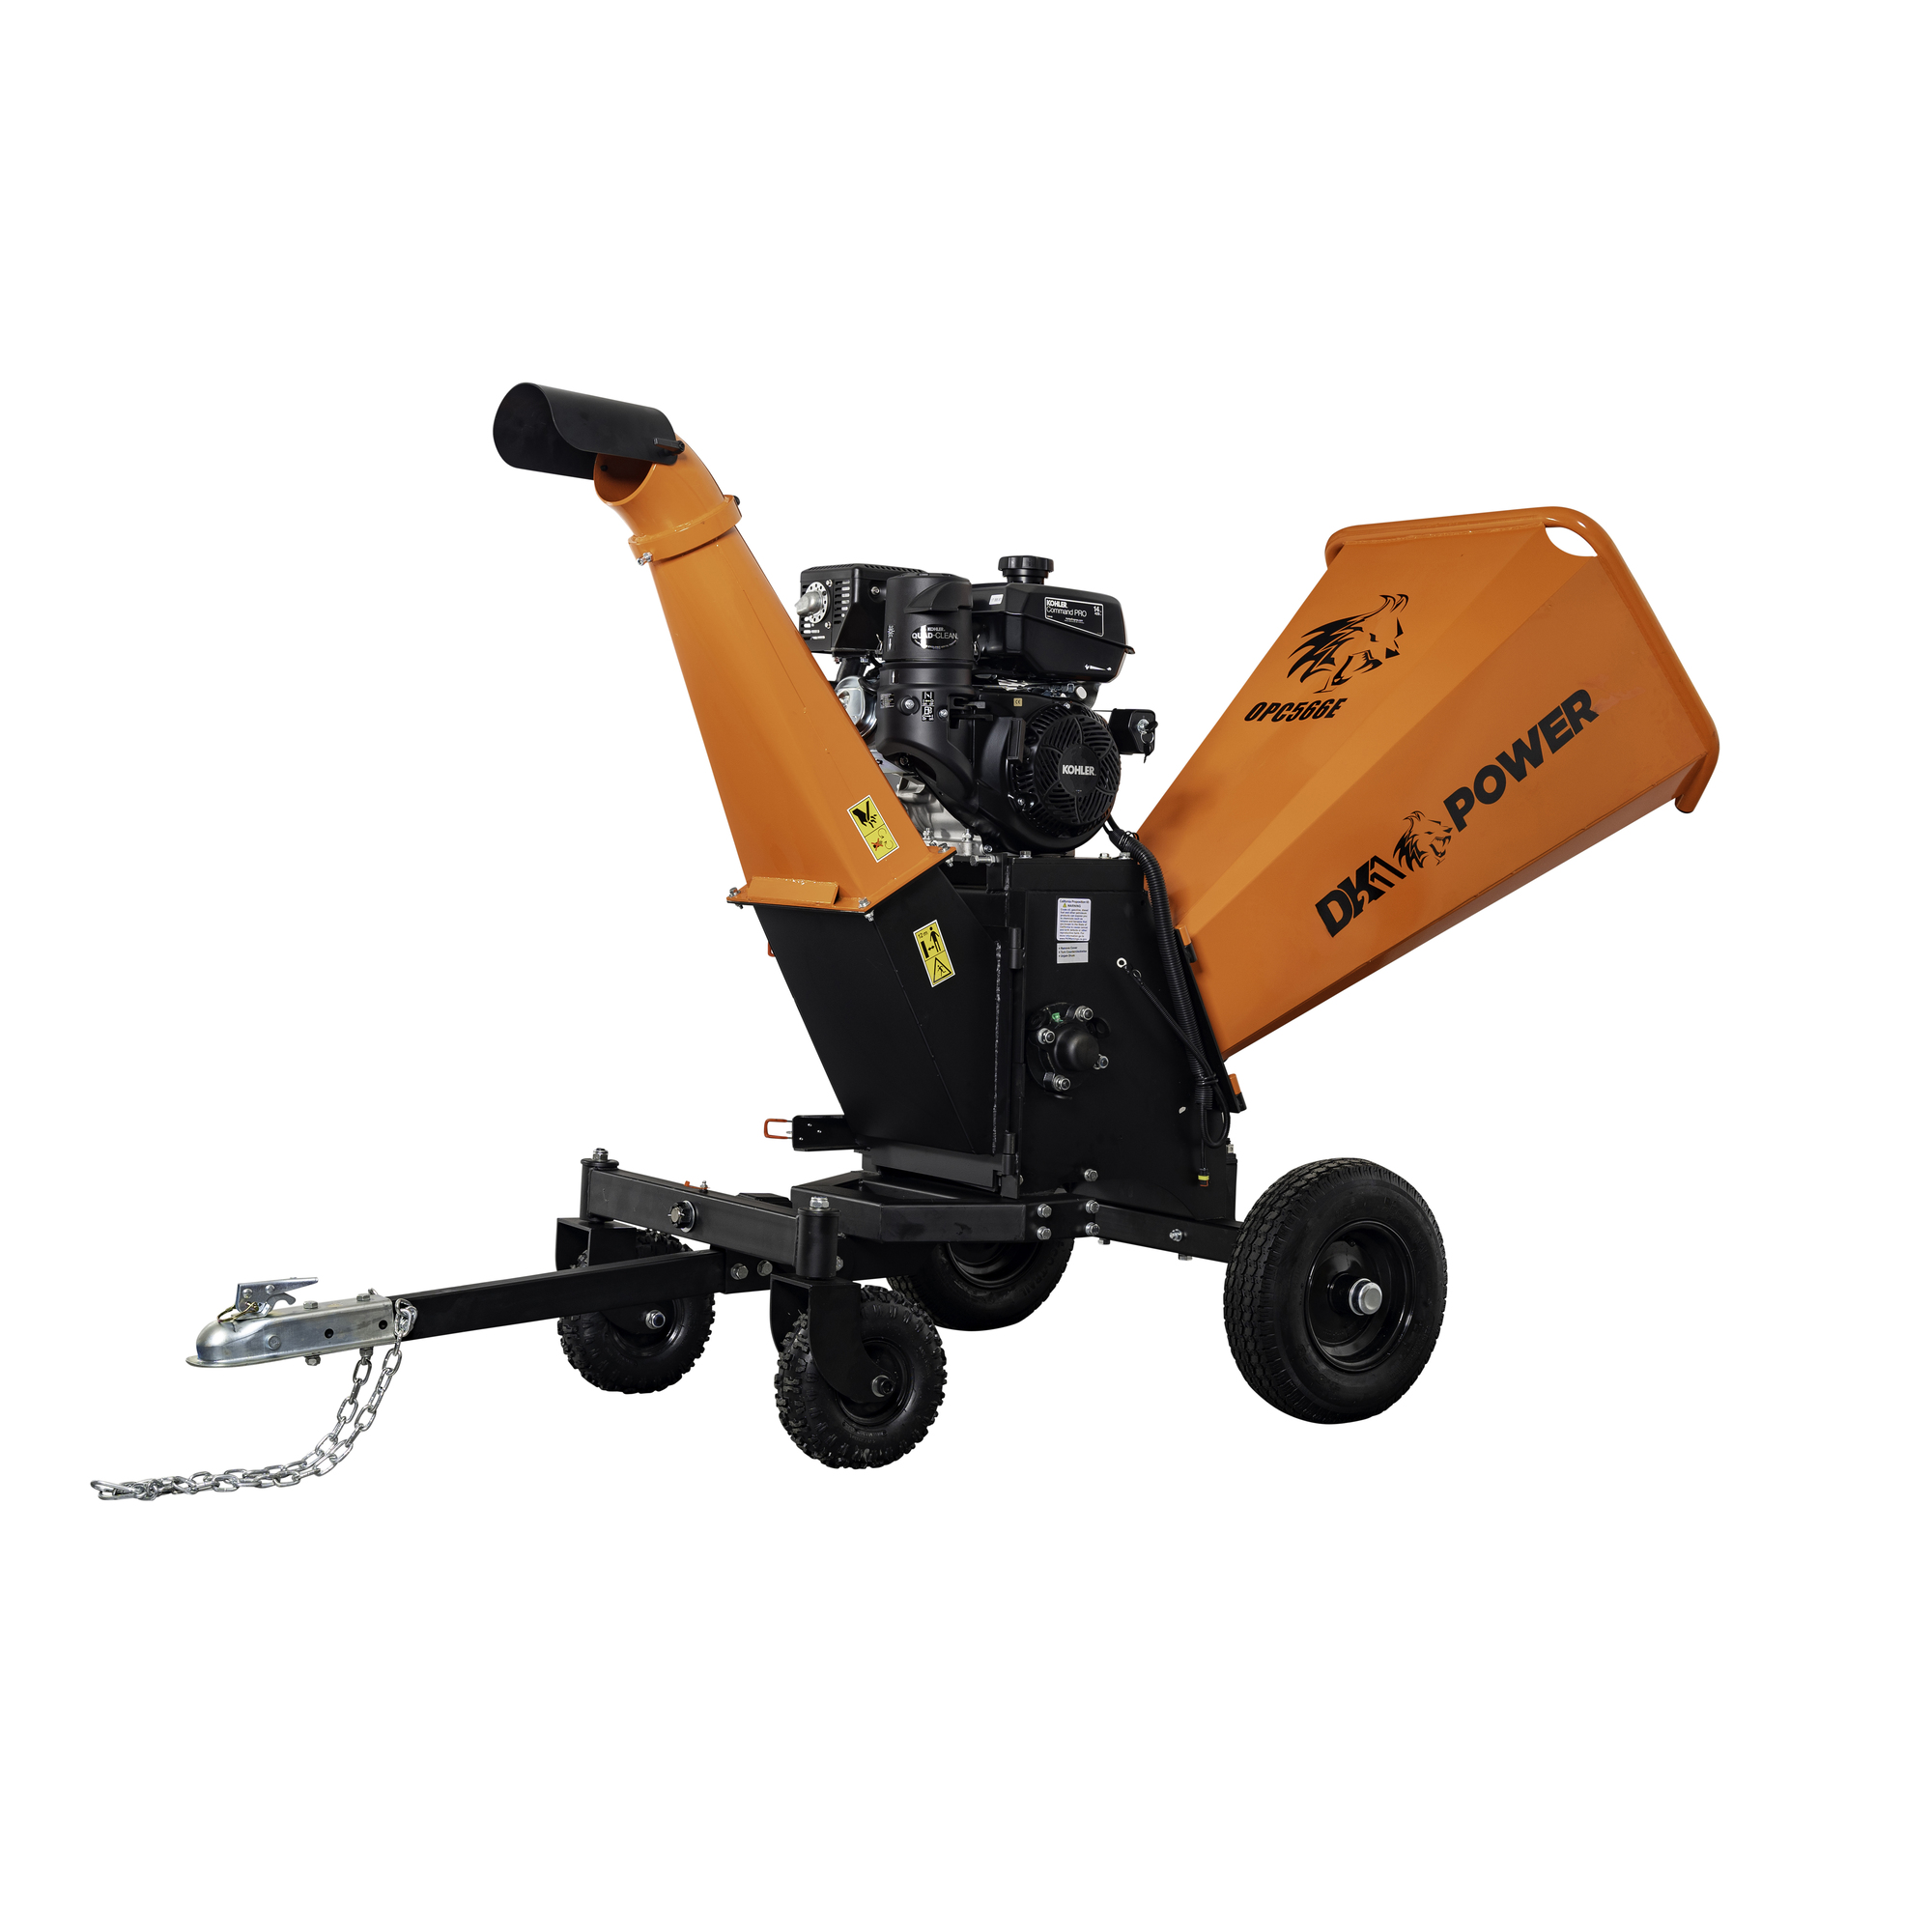 DK2 Power Commercial Kinetic Cyclonic Chipper, Engine Displacement 429 cc, 14 HP, 6Inch Cutting, Model OPC566E